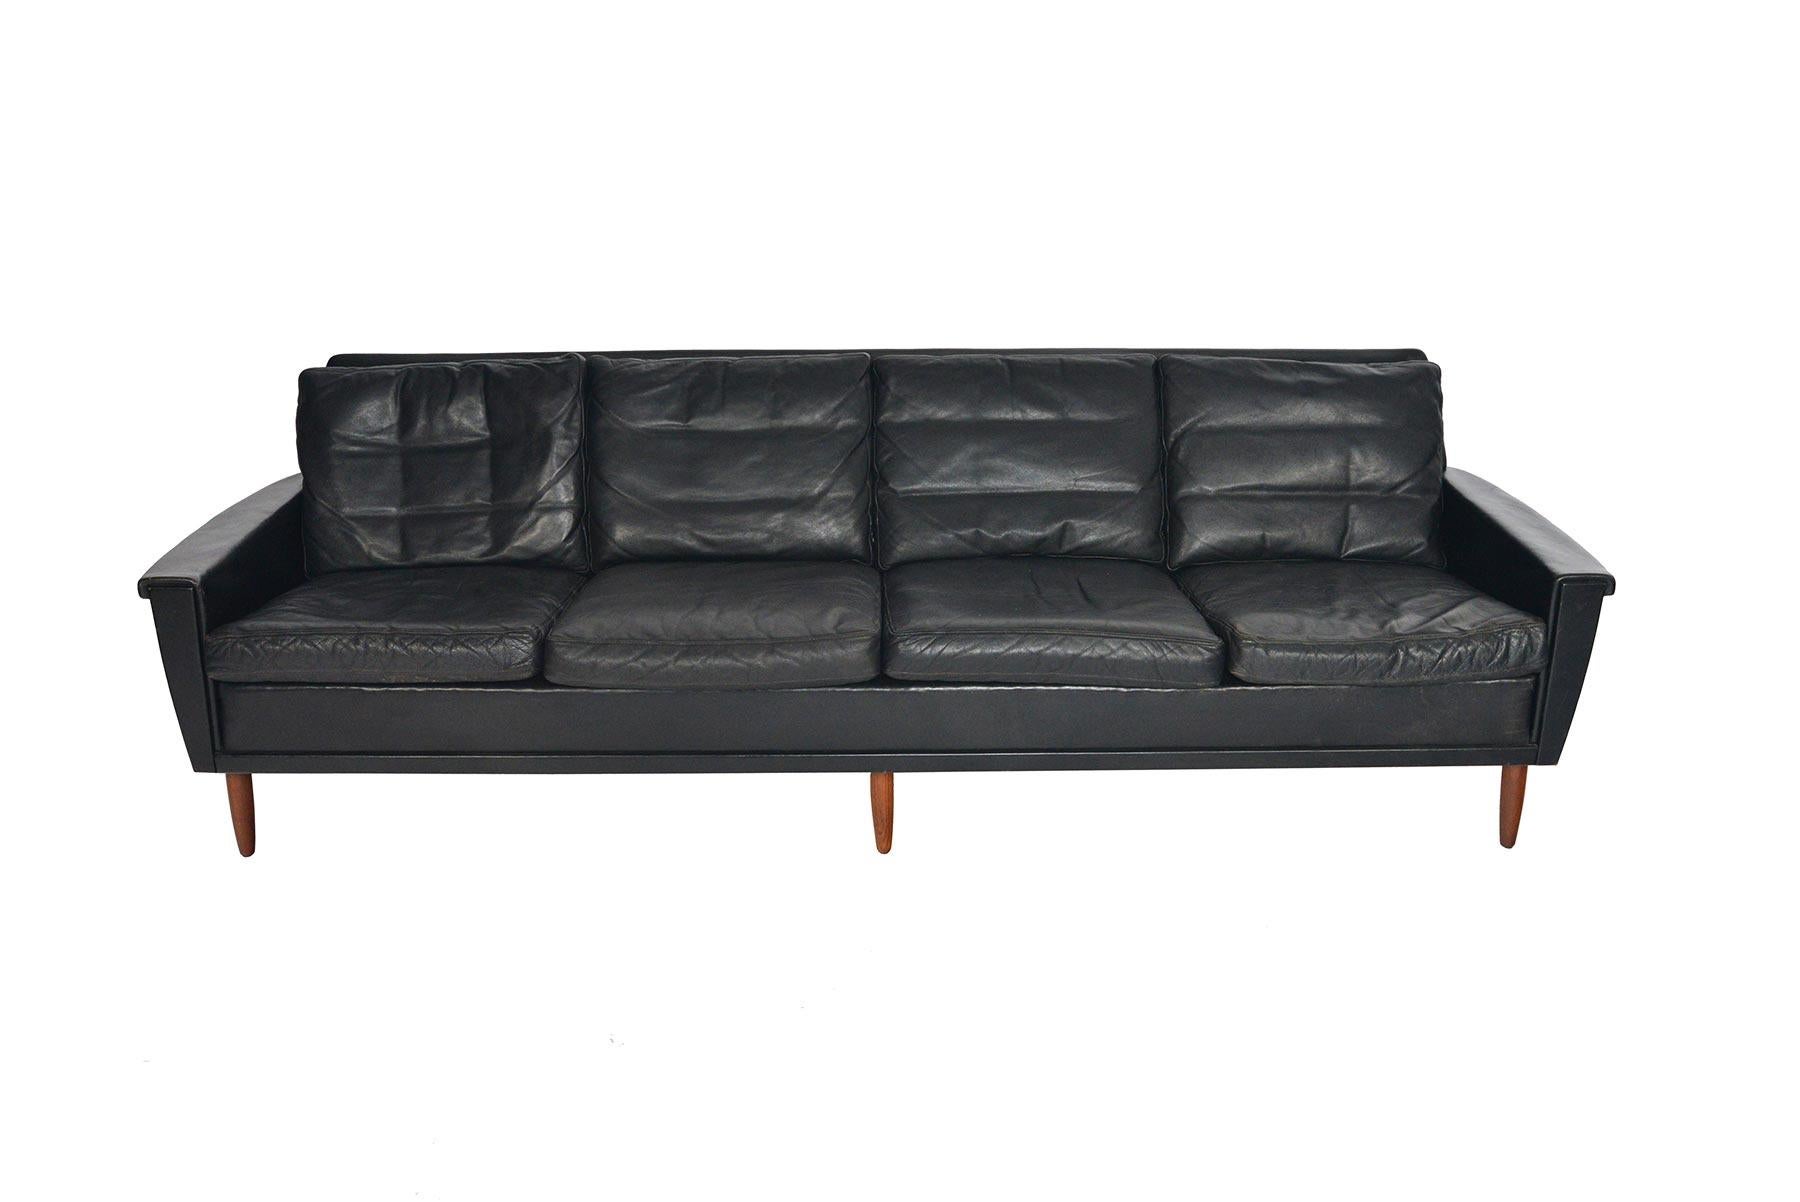 This long Danish modern four seat sofa was manufactured by Georg Thams in the 1960s. The slender upholstered frame holds eight leather cushions. Sofa stands on five teak spindle legs. In excellent original condition. 

